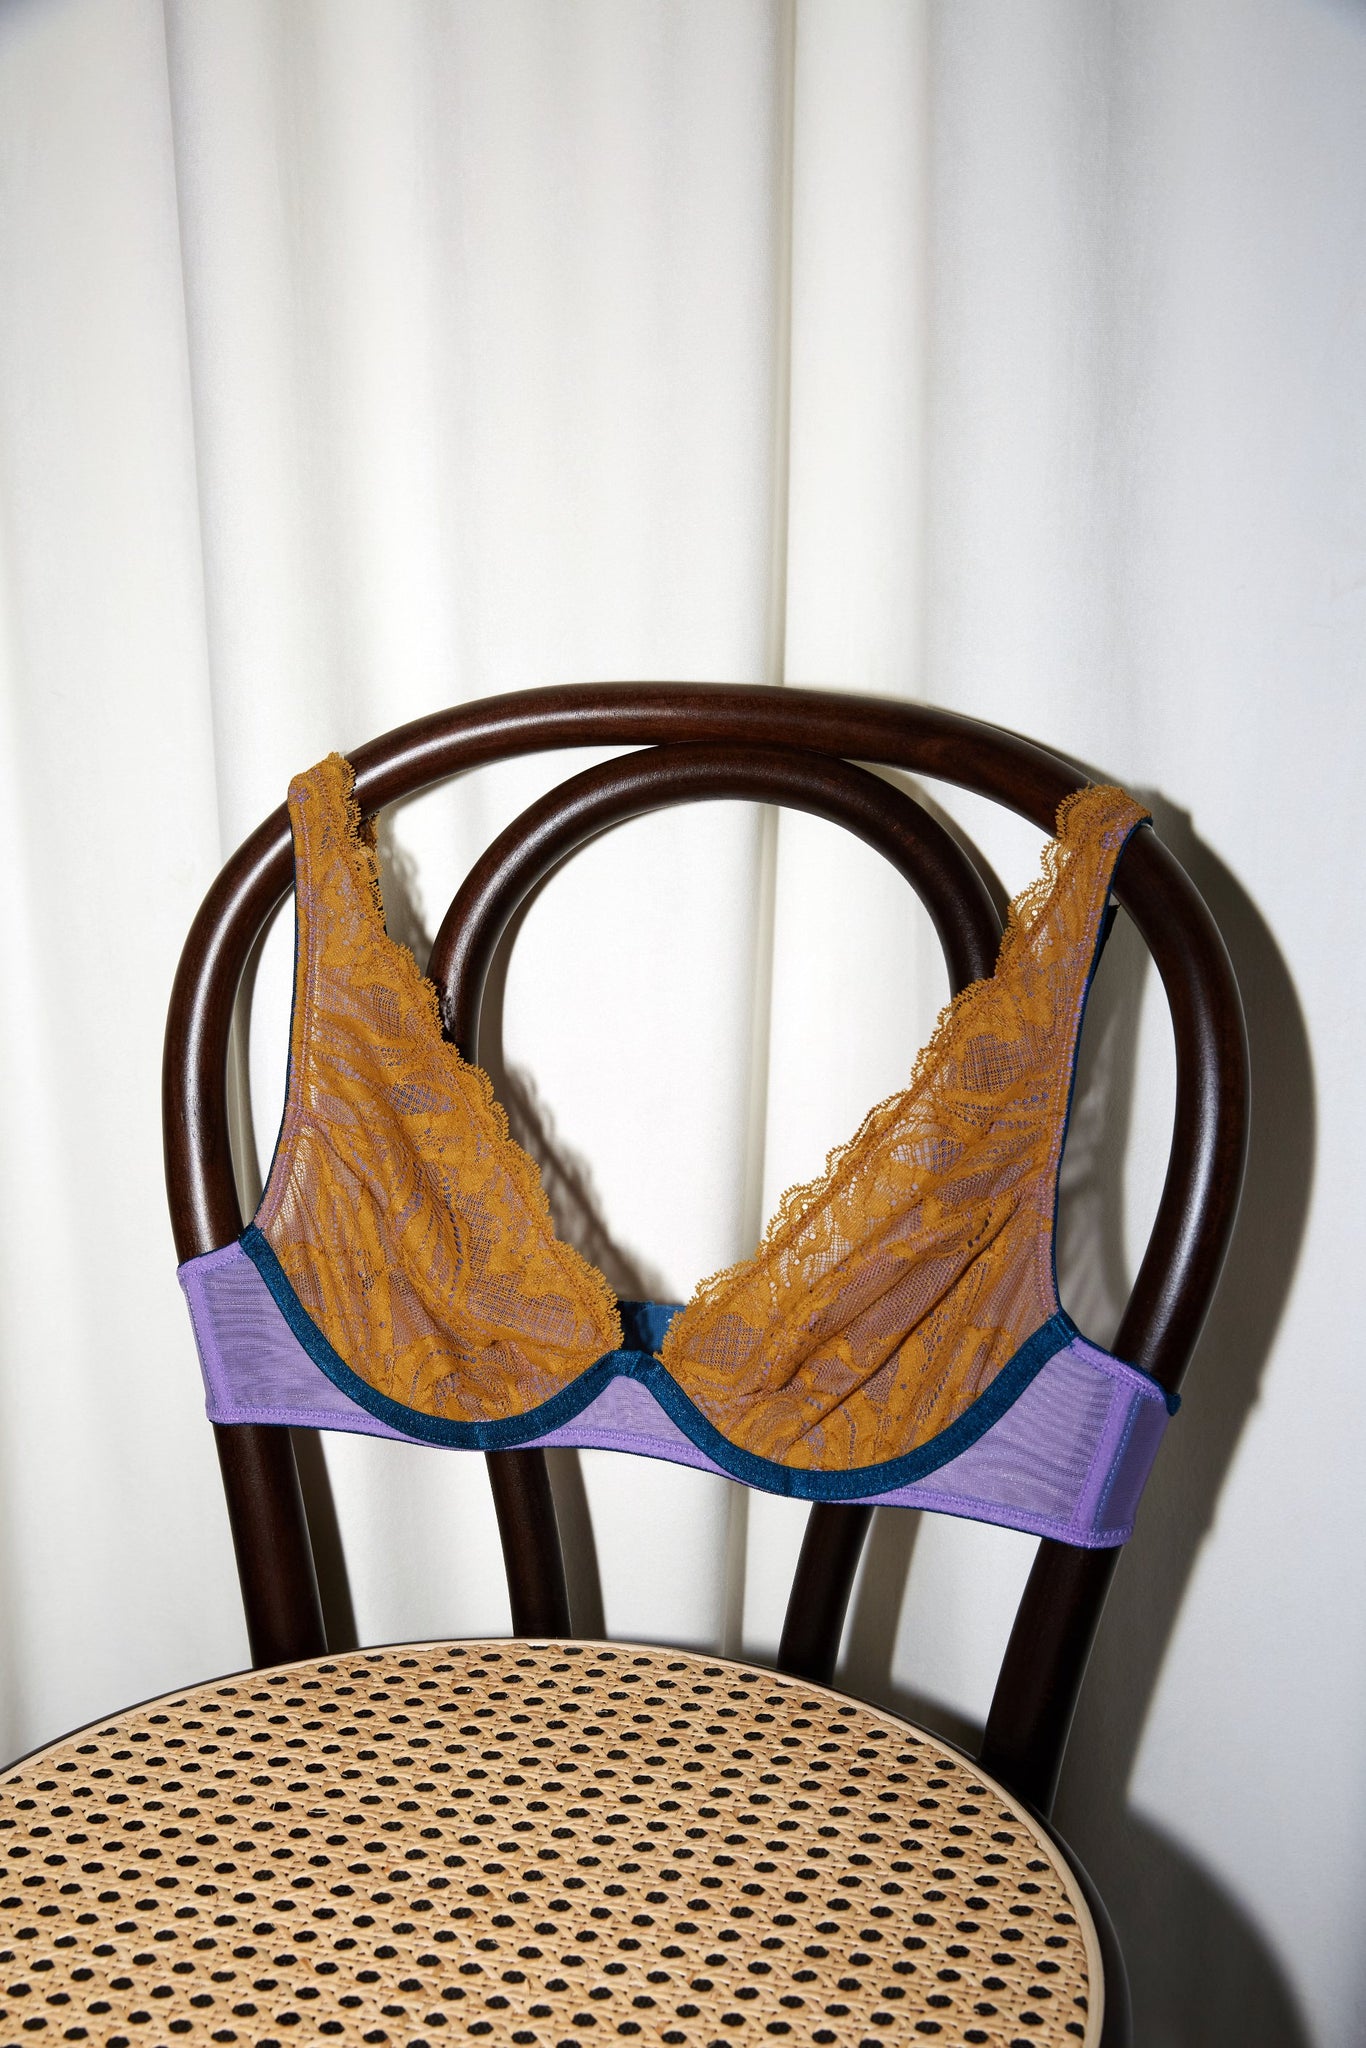 At Home With DL-A letter from our Founders - Dora Larsen | Colourful Lingerie